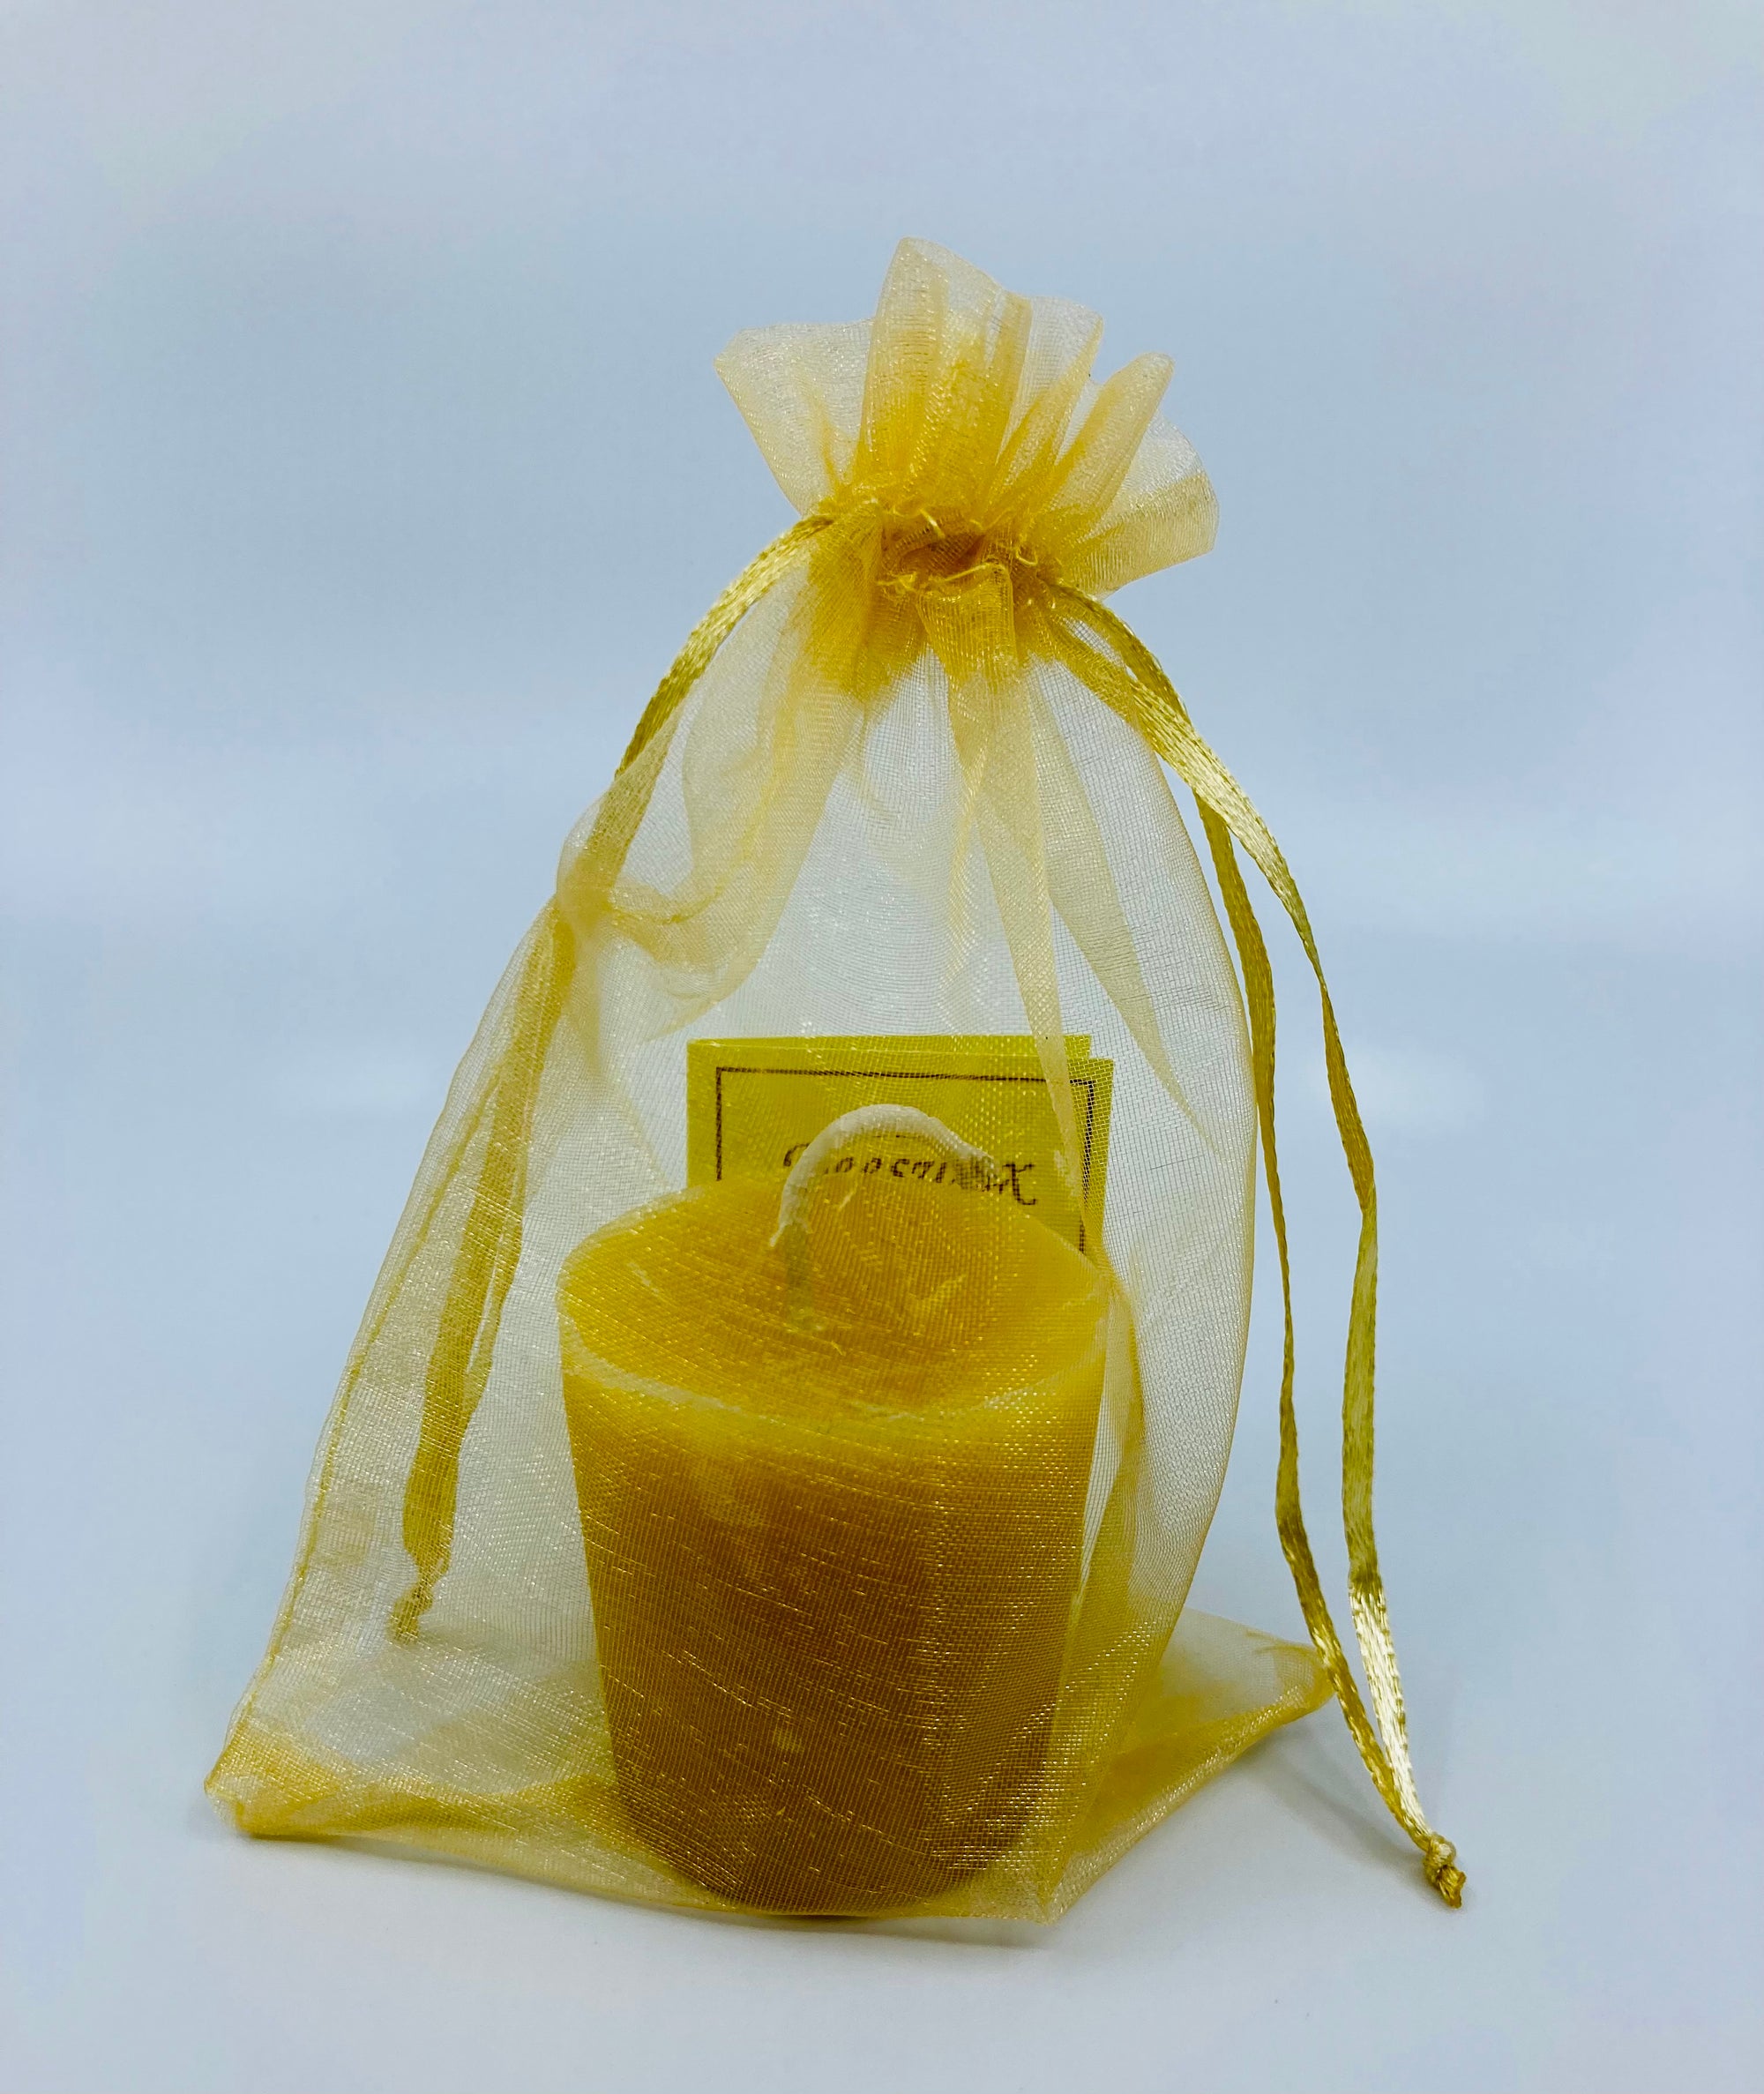 A 100% beeswax candle in a traditional votive shape.  Please note that since beeswax is a natural resource there may be variation in color from pale yellow to dark gold.